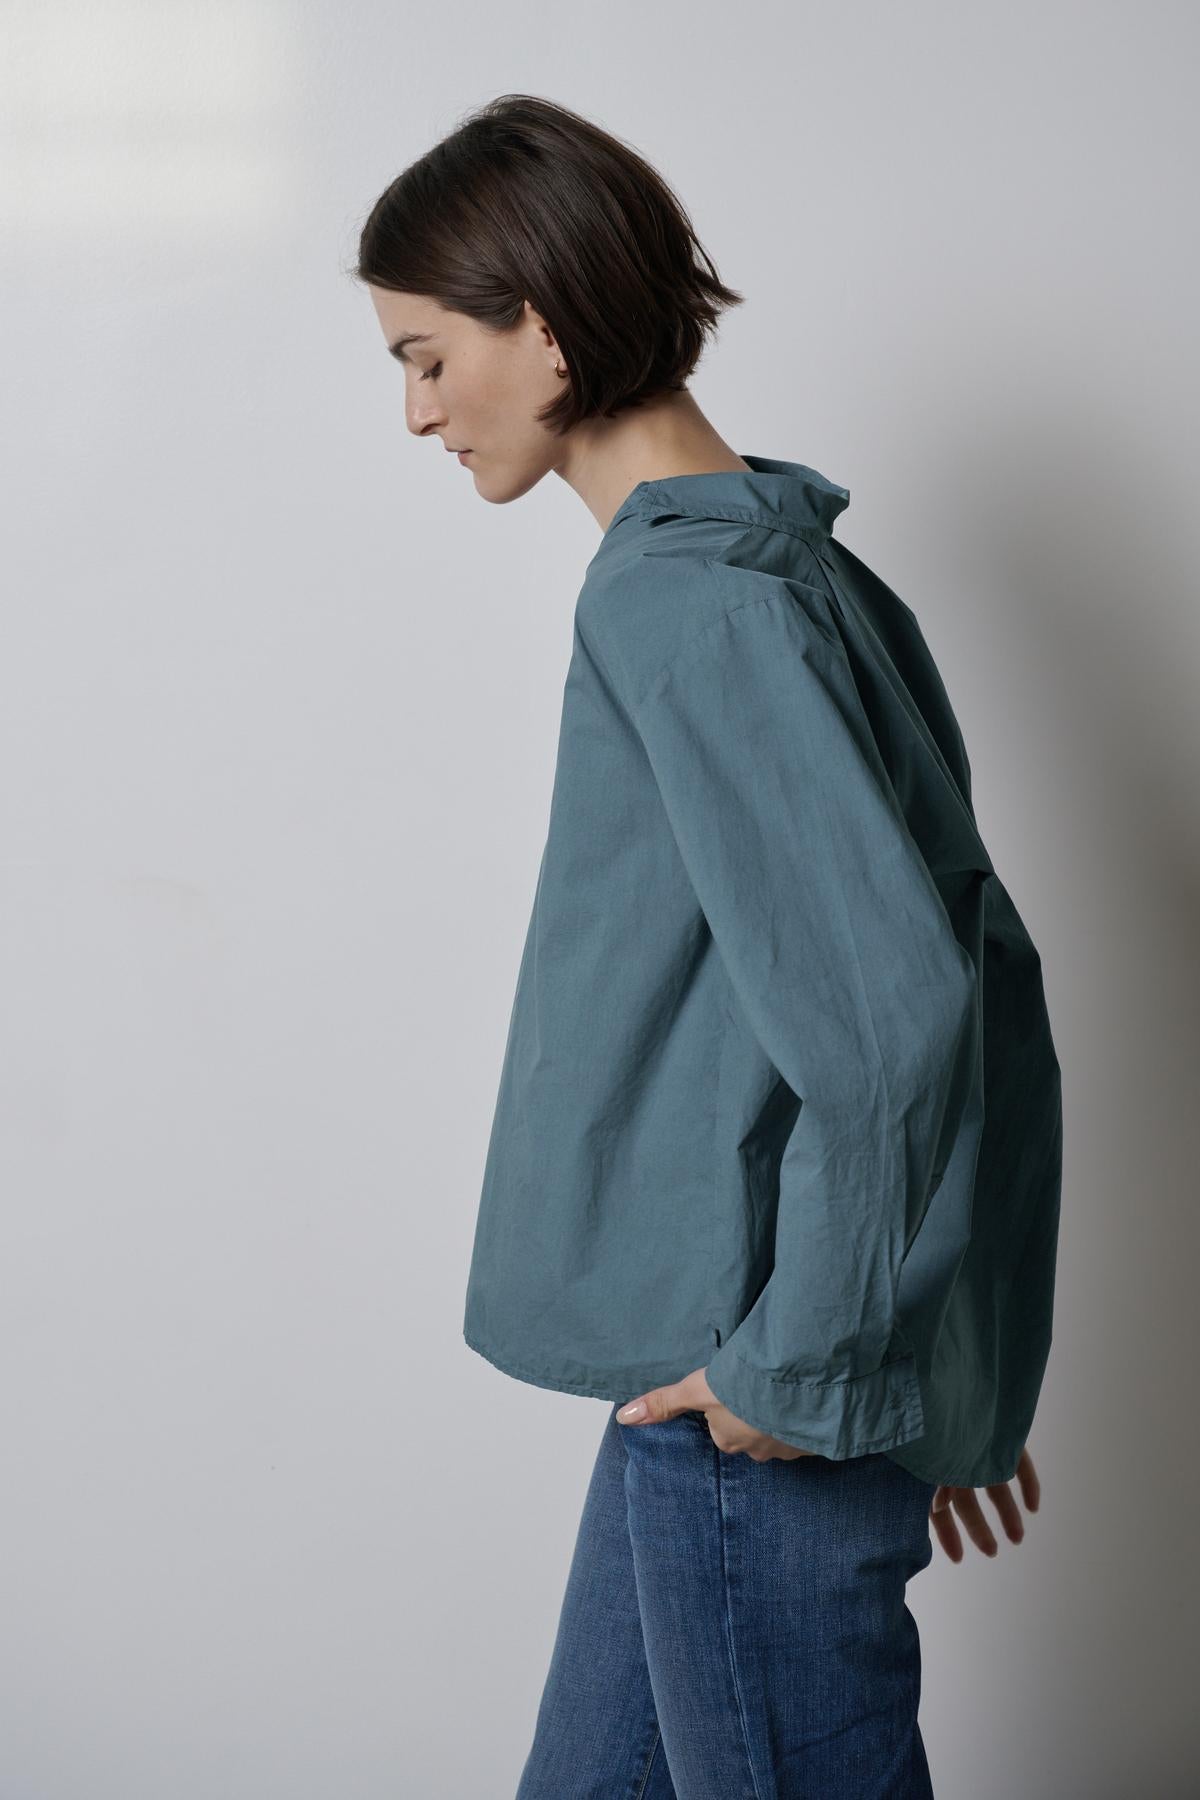   A woman wearing jeans and a Velvet by Jenny Graham BREA SHIRT view from side 